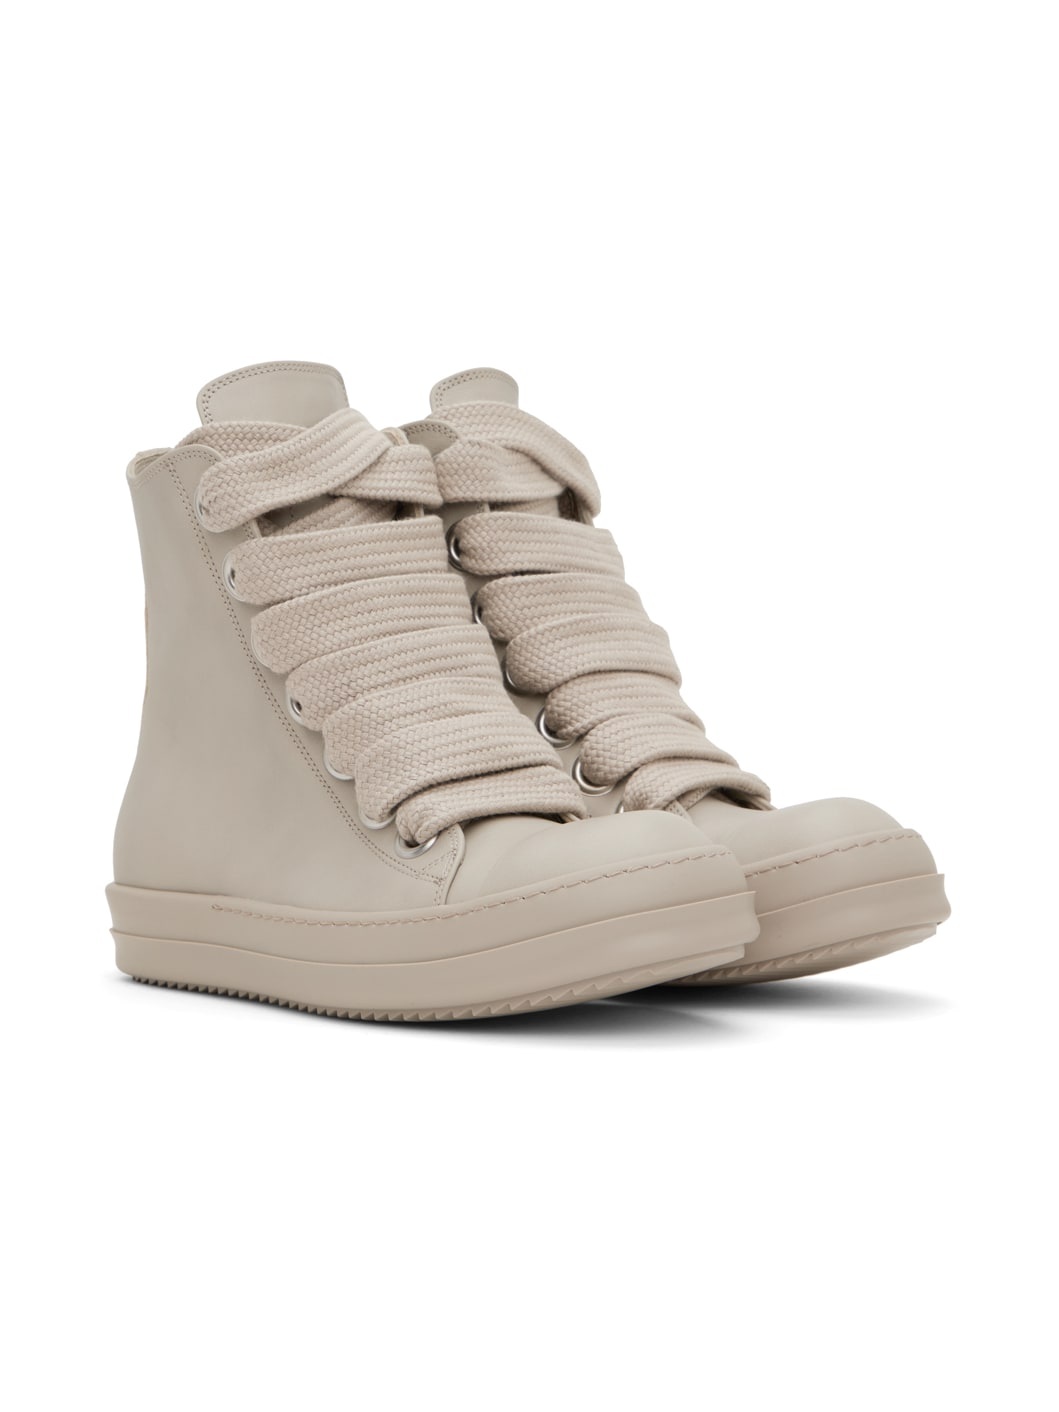 Off-White Washed Calf Sneakers - 4